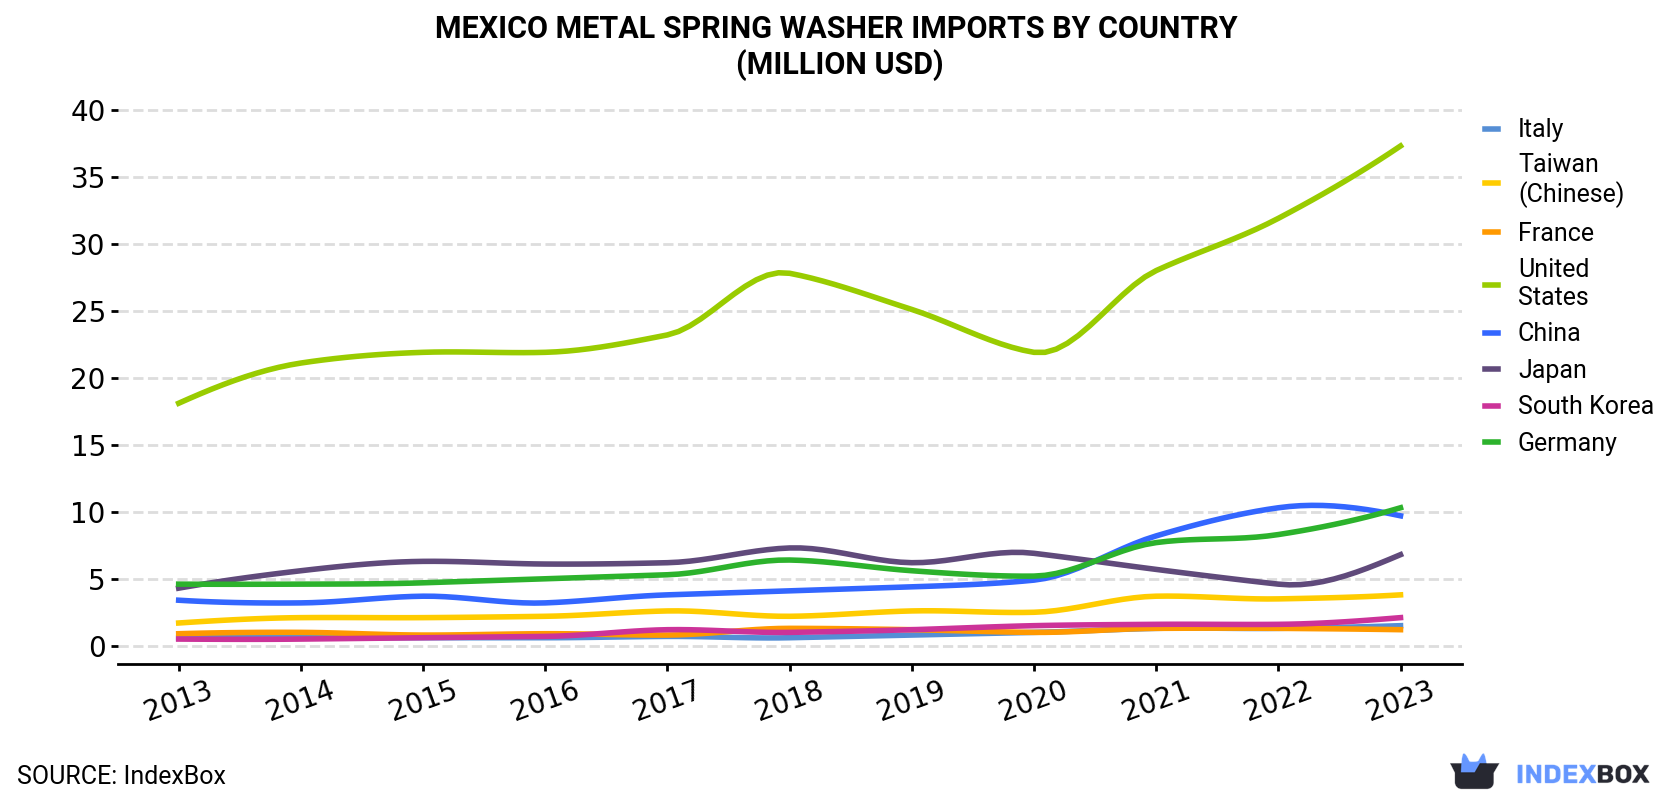 Mexico Metal Spring Washer Imports By Country (Million USD)